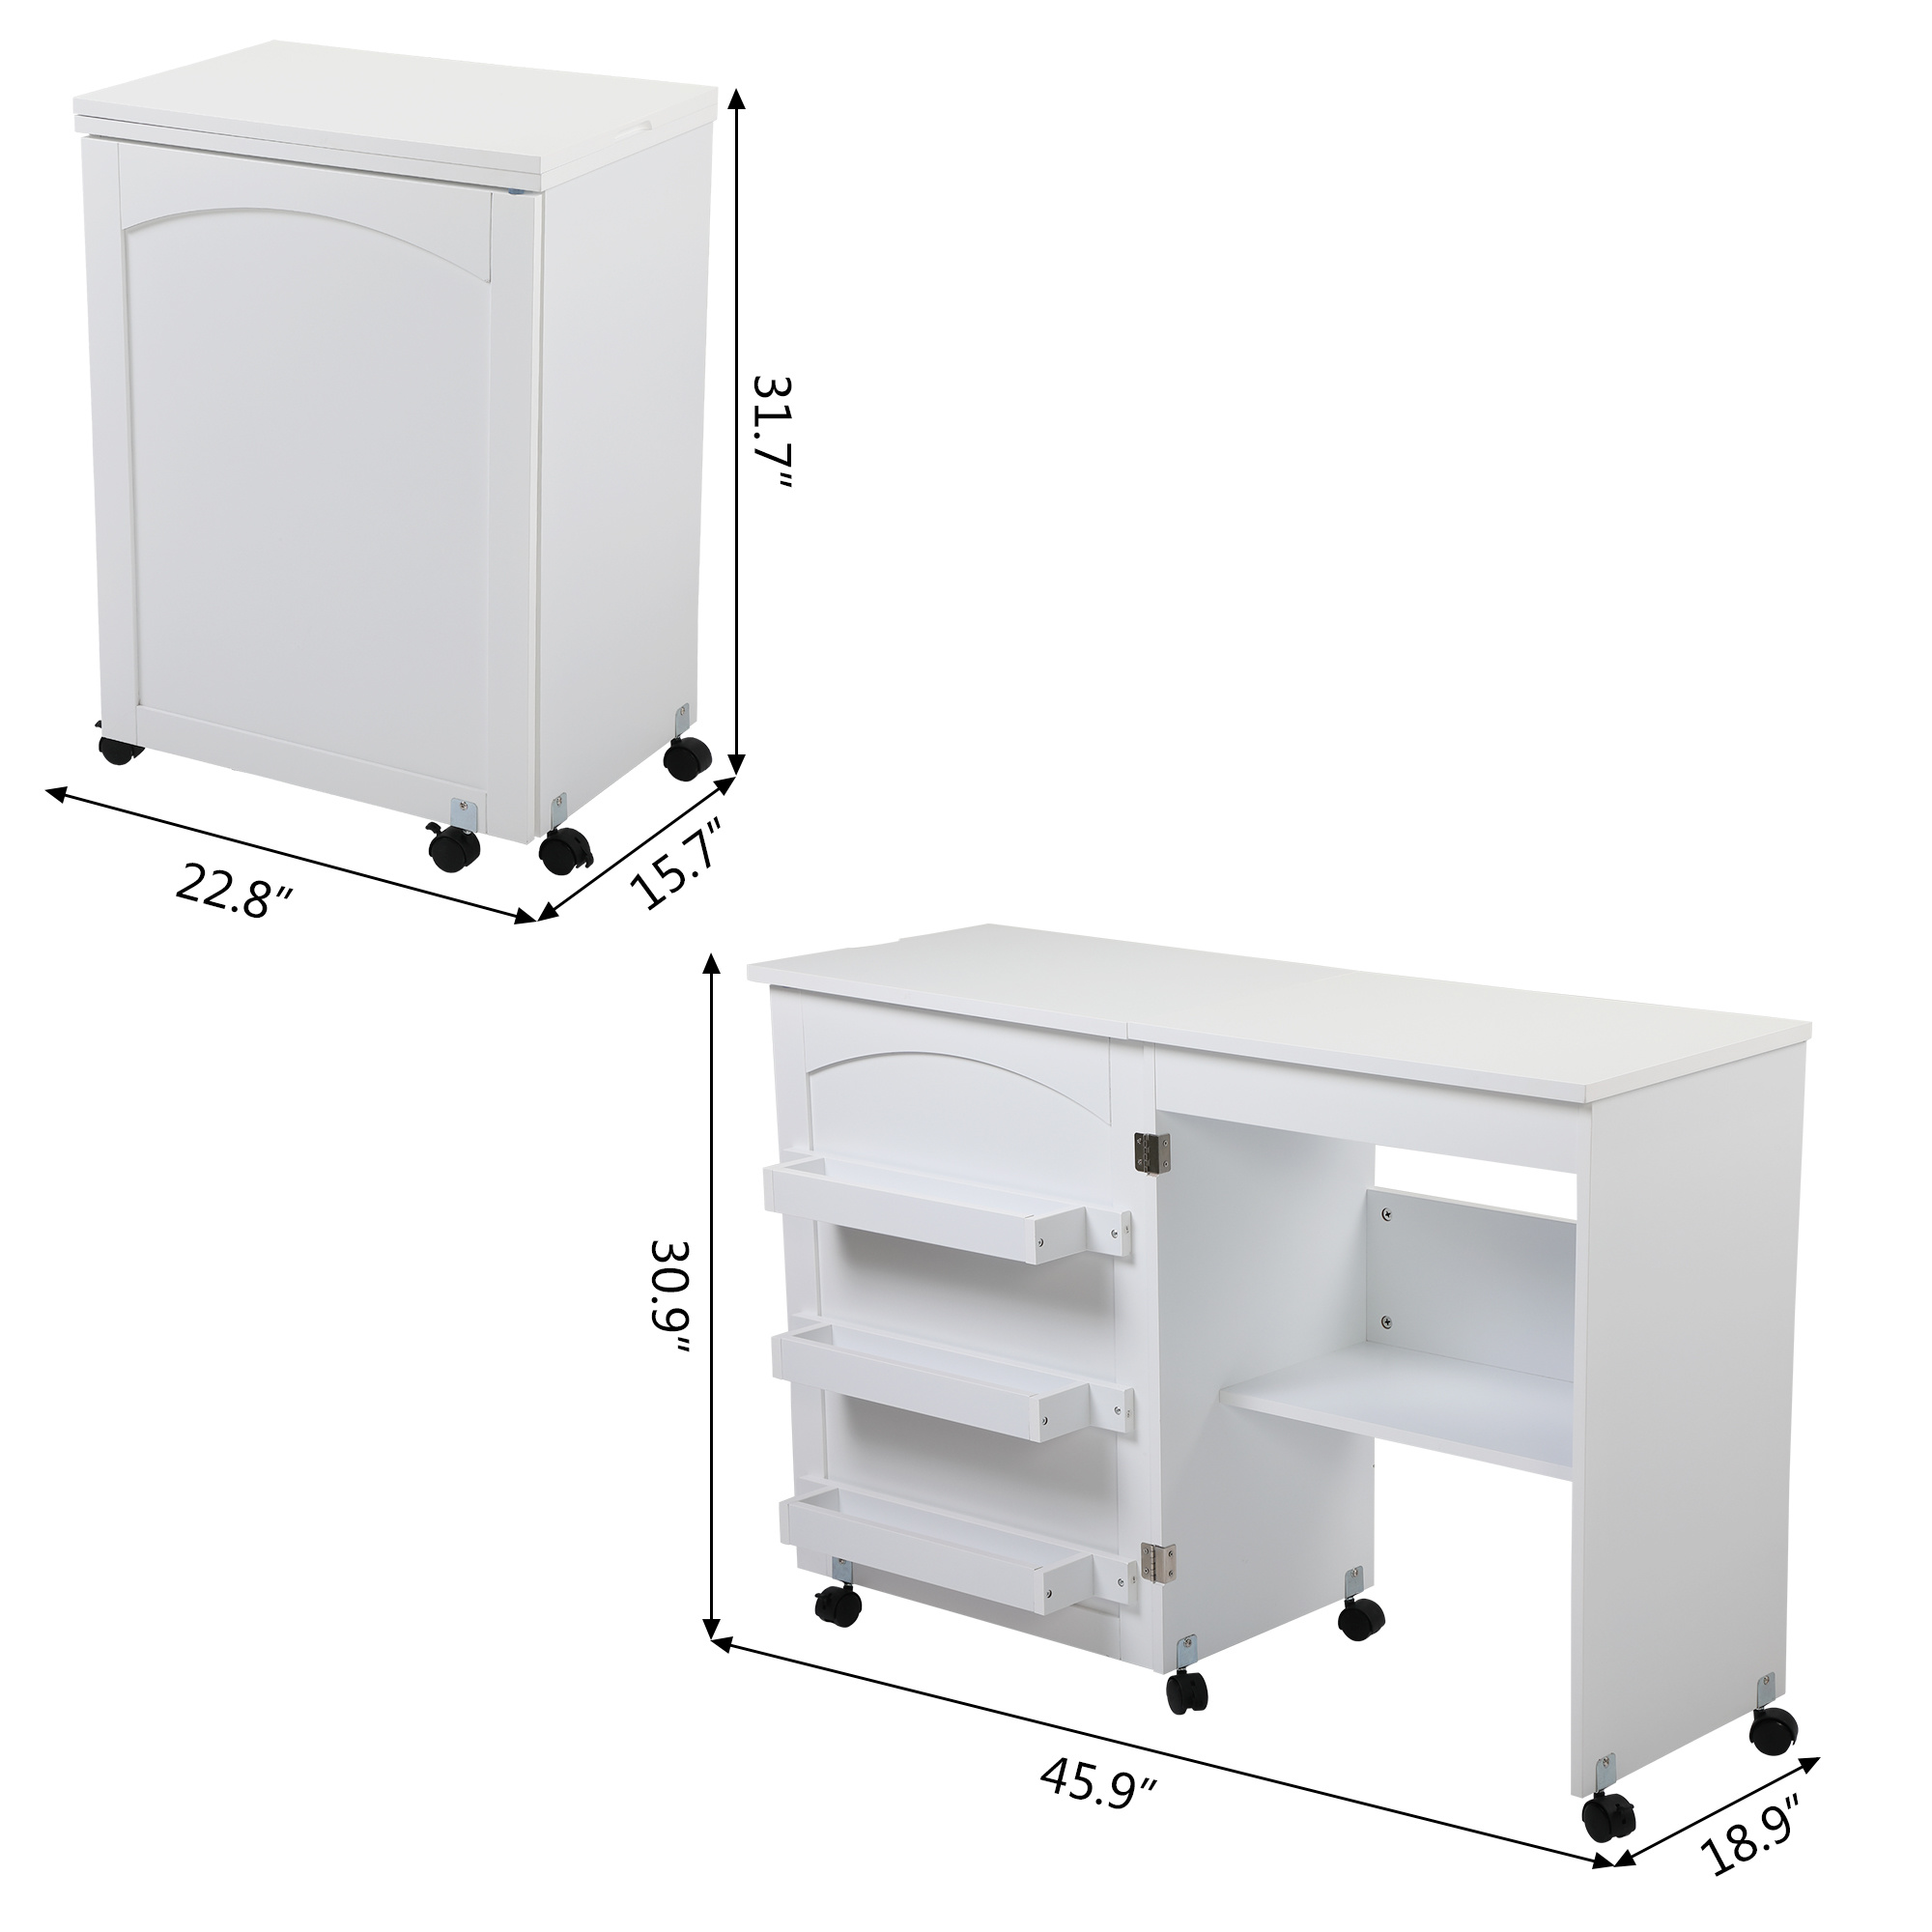 Folding Sewing Cabinet with Storage - Hooving Stovers